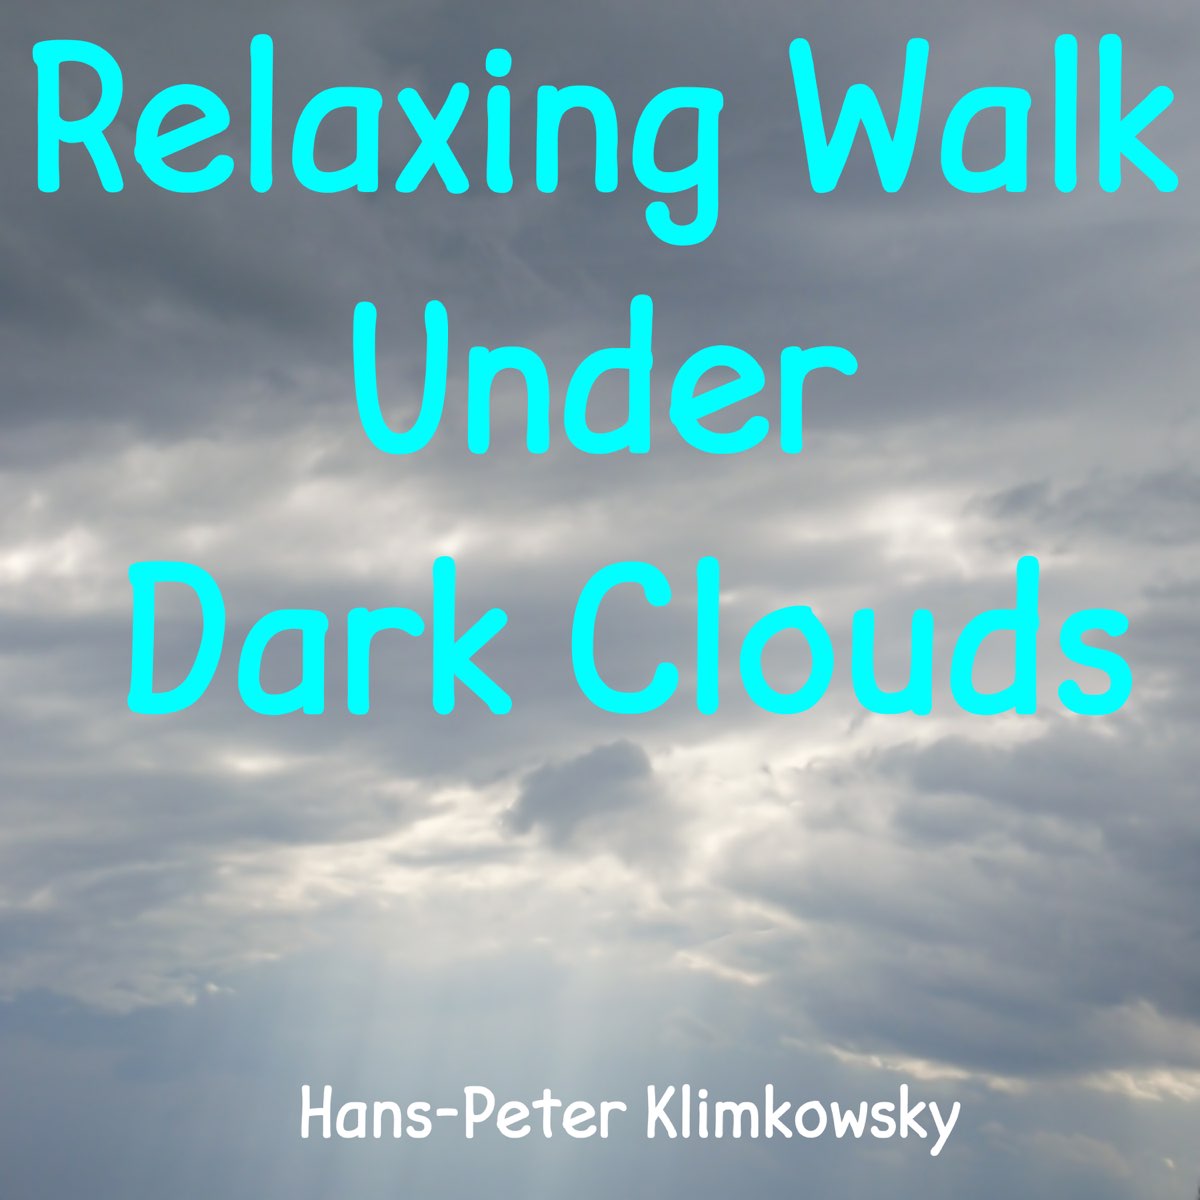 Relaxing walks. Relaxing on a Rainy Day in Spring, pt. 1 От Hans-Peter Klimkowsky Ноты для фортепиано. Relaxing on a beautiful morning Reloaded for Piano solo Hans-Peter Klimkowsky.